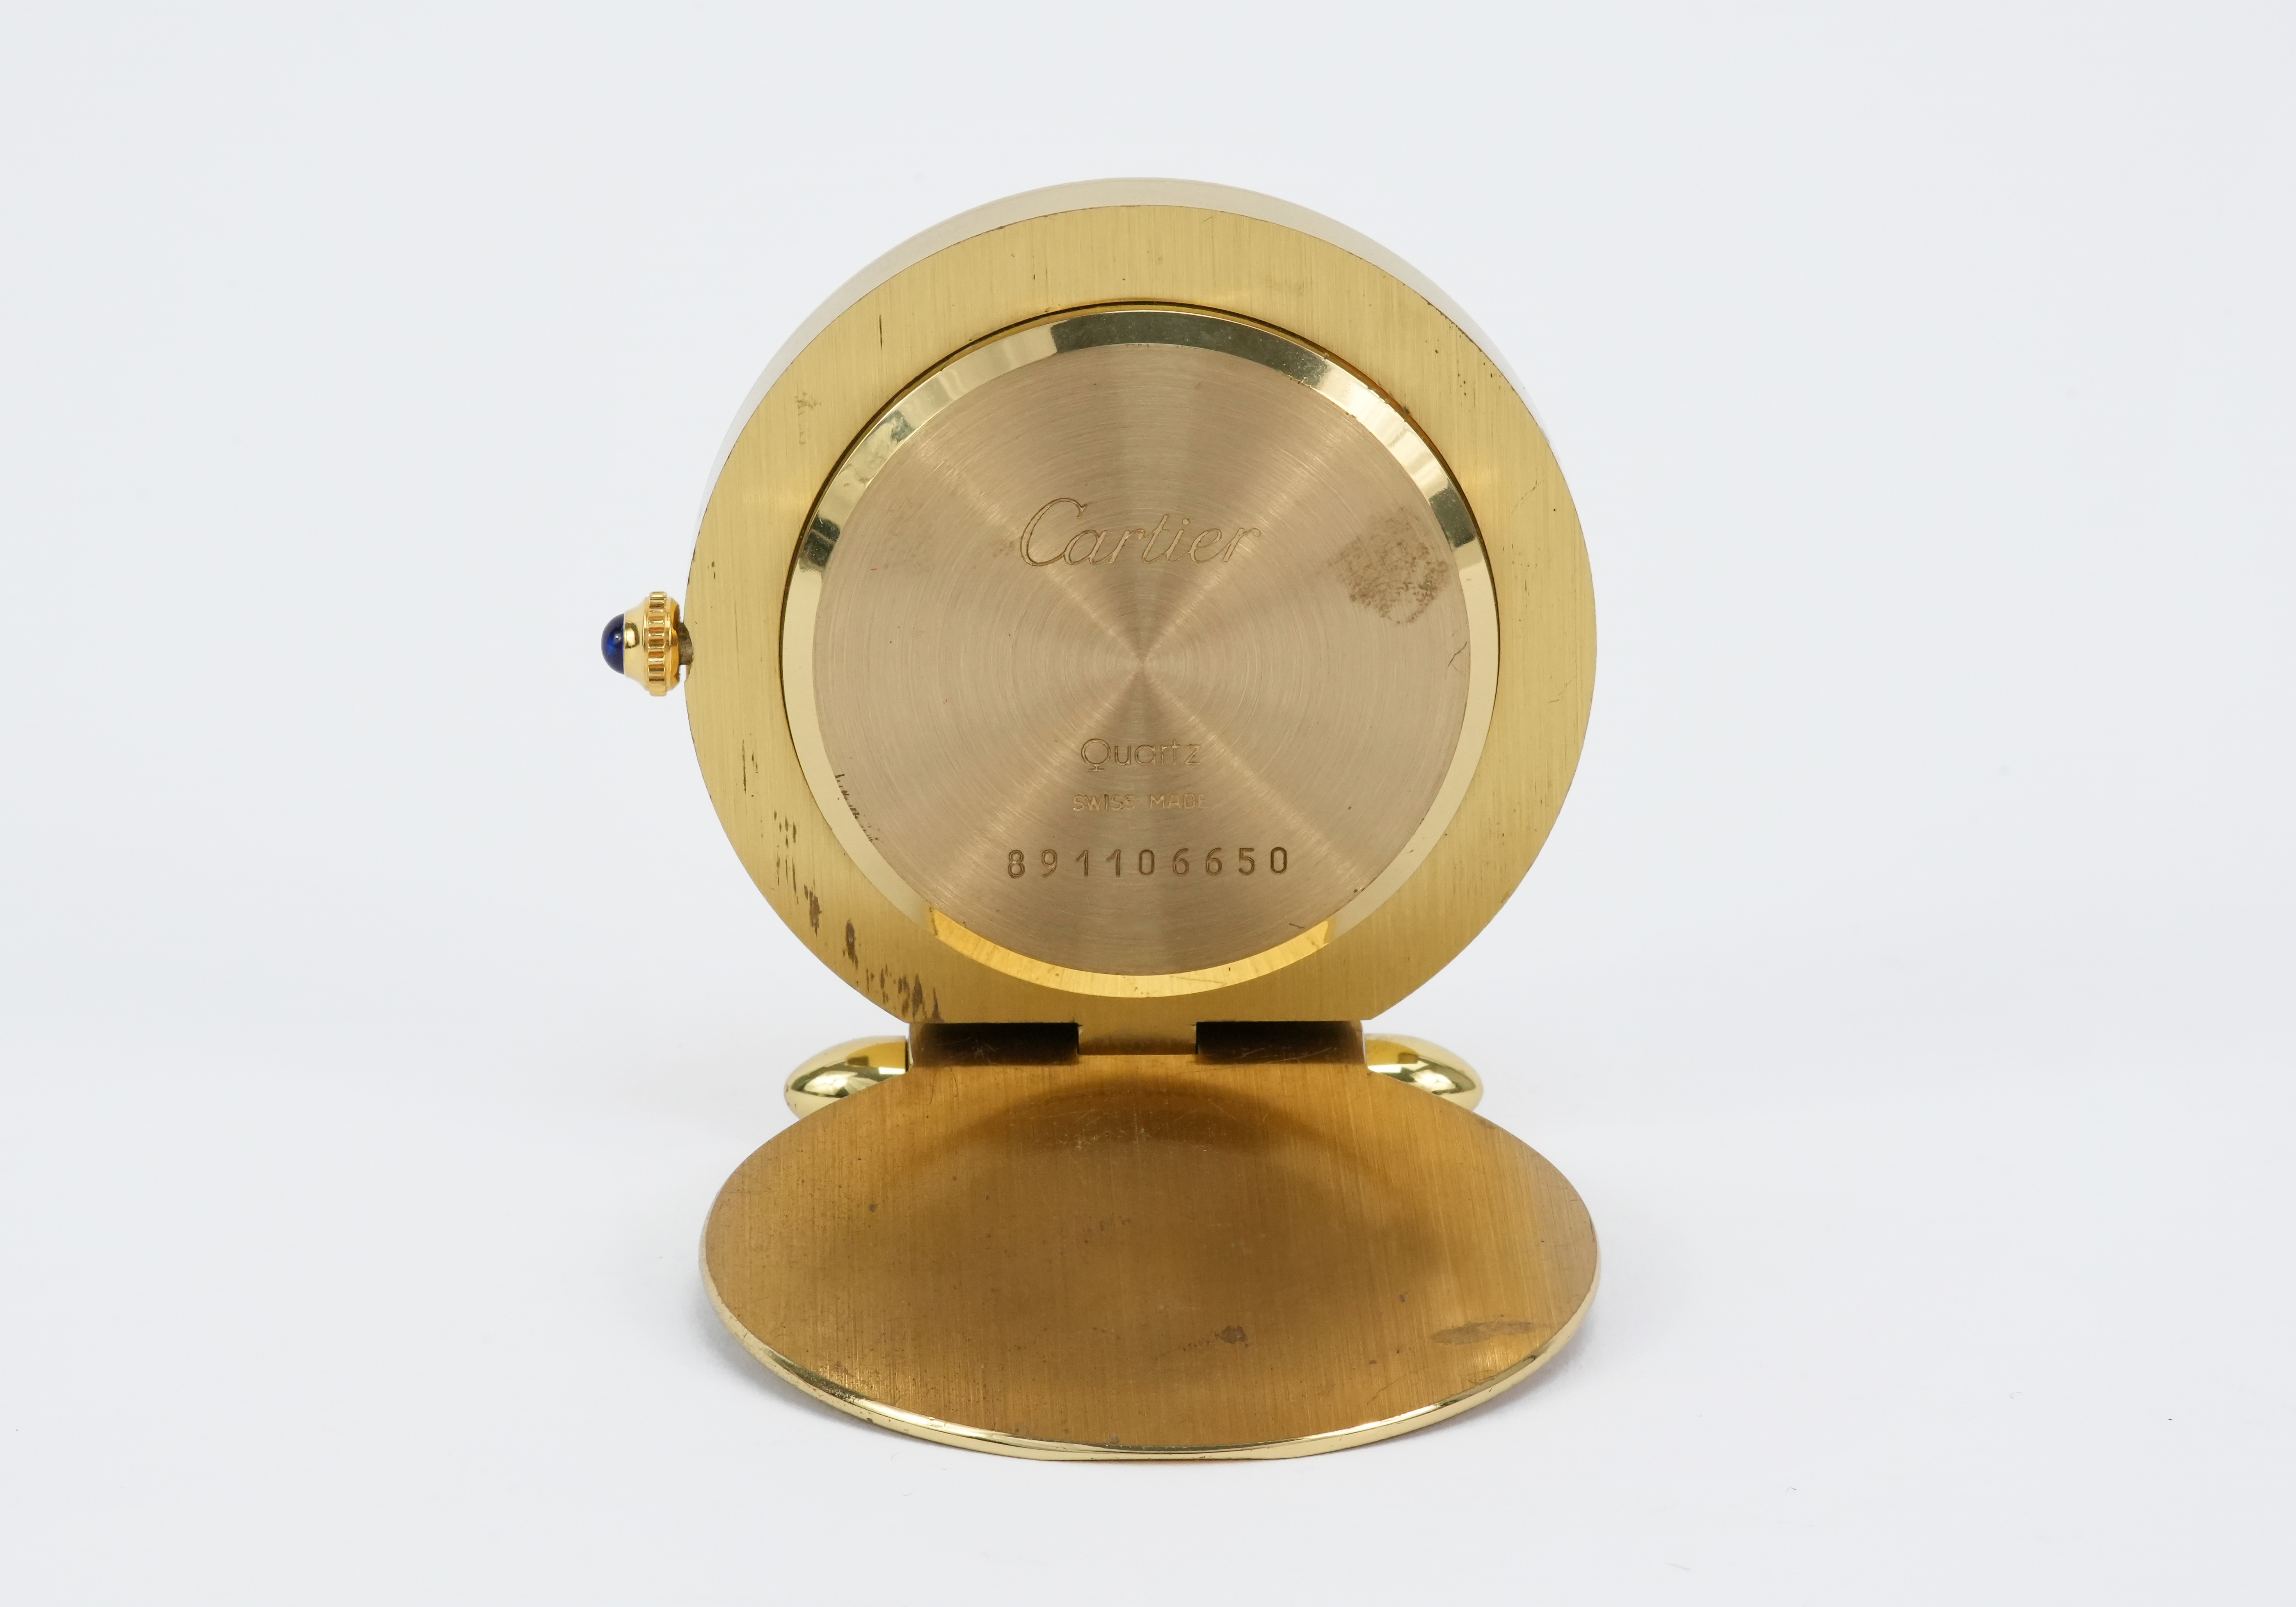 Cartier Brass and Blue Enamel Travel Clock - Image 3 of 4